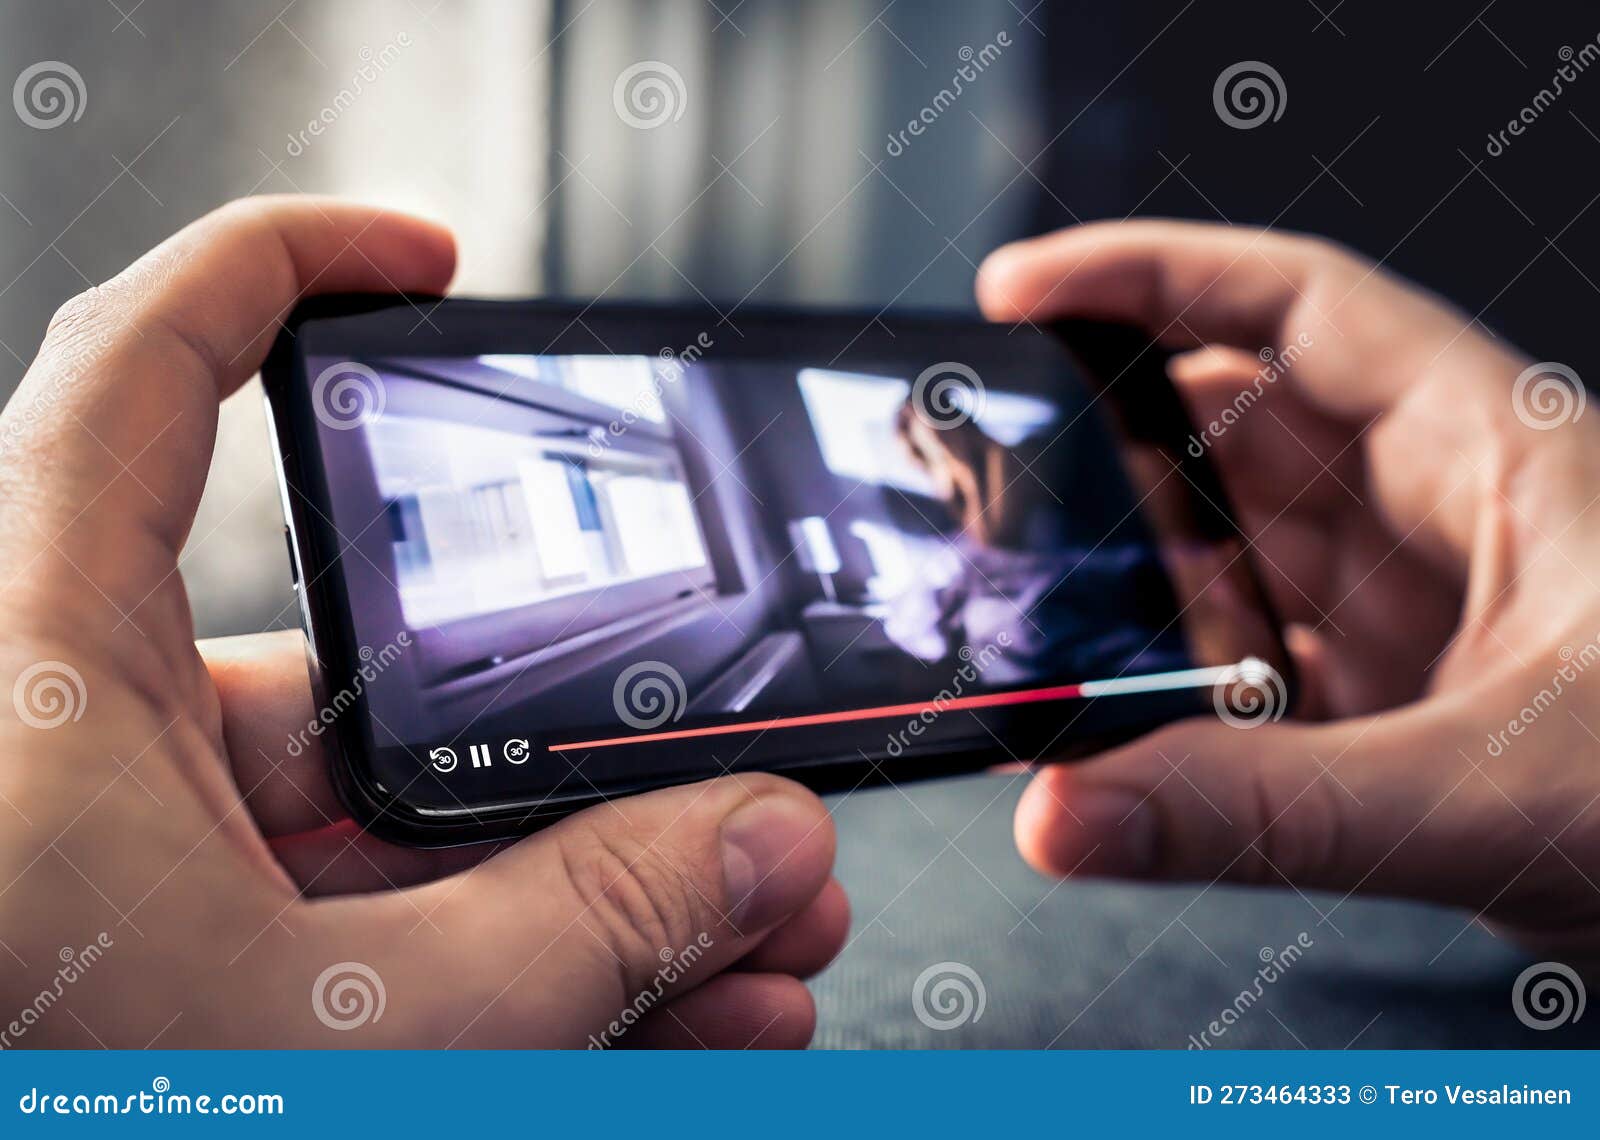 Movie Stream and Watching Video with Phone. Tv Series in Online VOD on Demand Service in Smartphone Screen